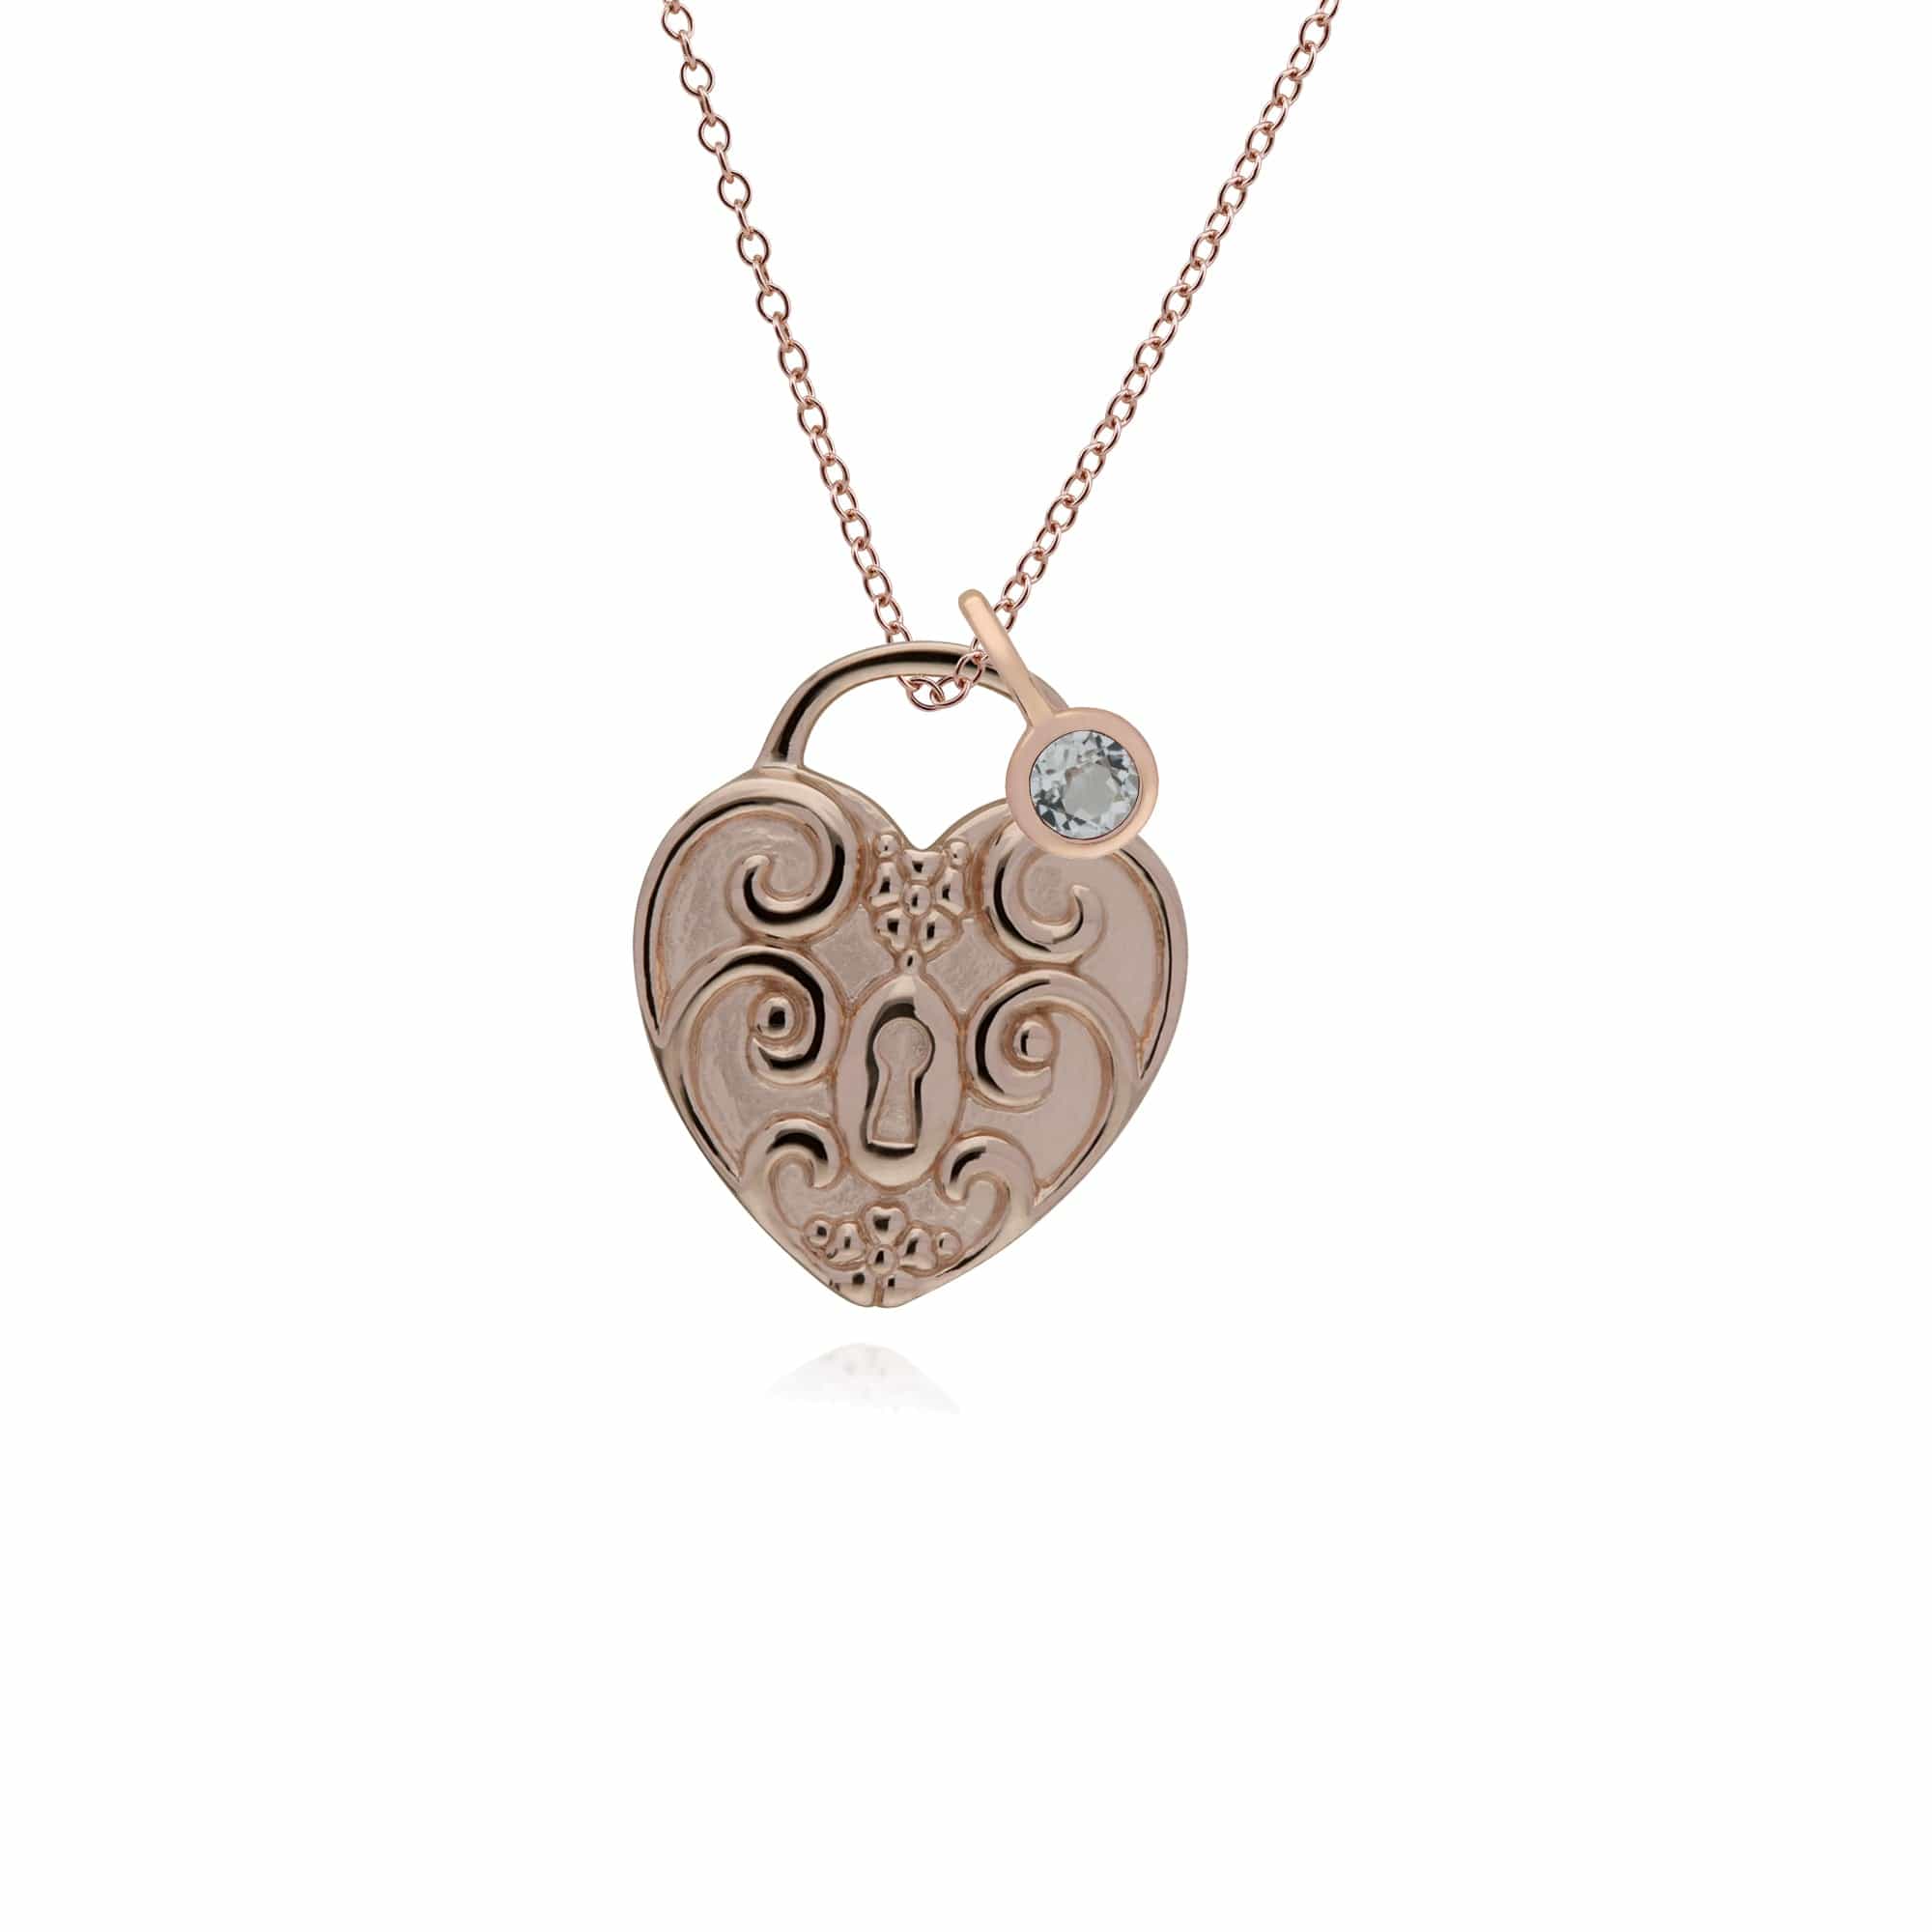 270P027308925-270P026501925 Classic Swirl Heart Lock Pendant & Clear Topaz Charm in Rose Gold Plated 925 Sterling Silver 1